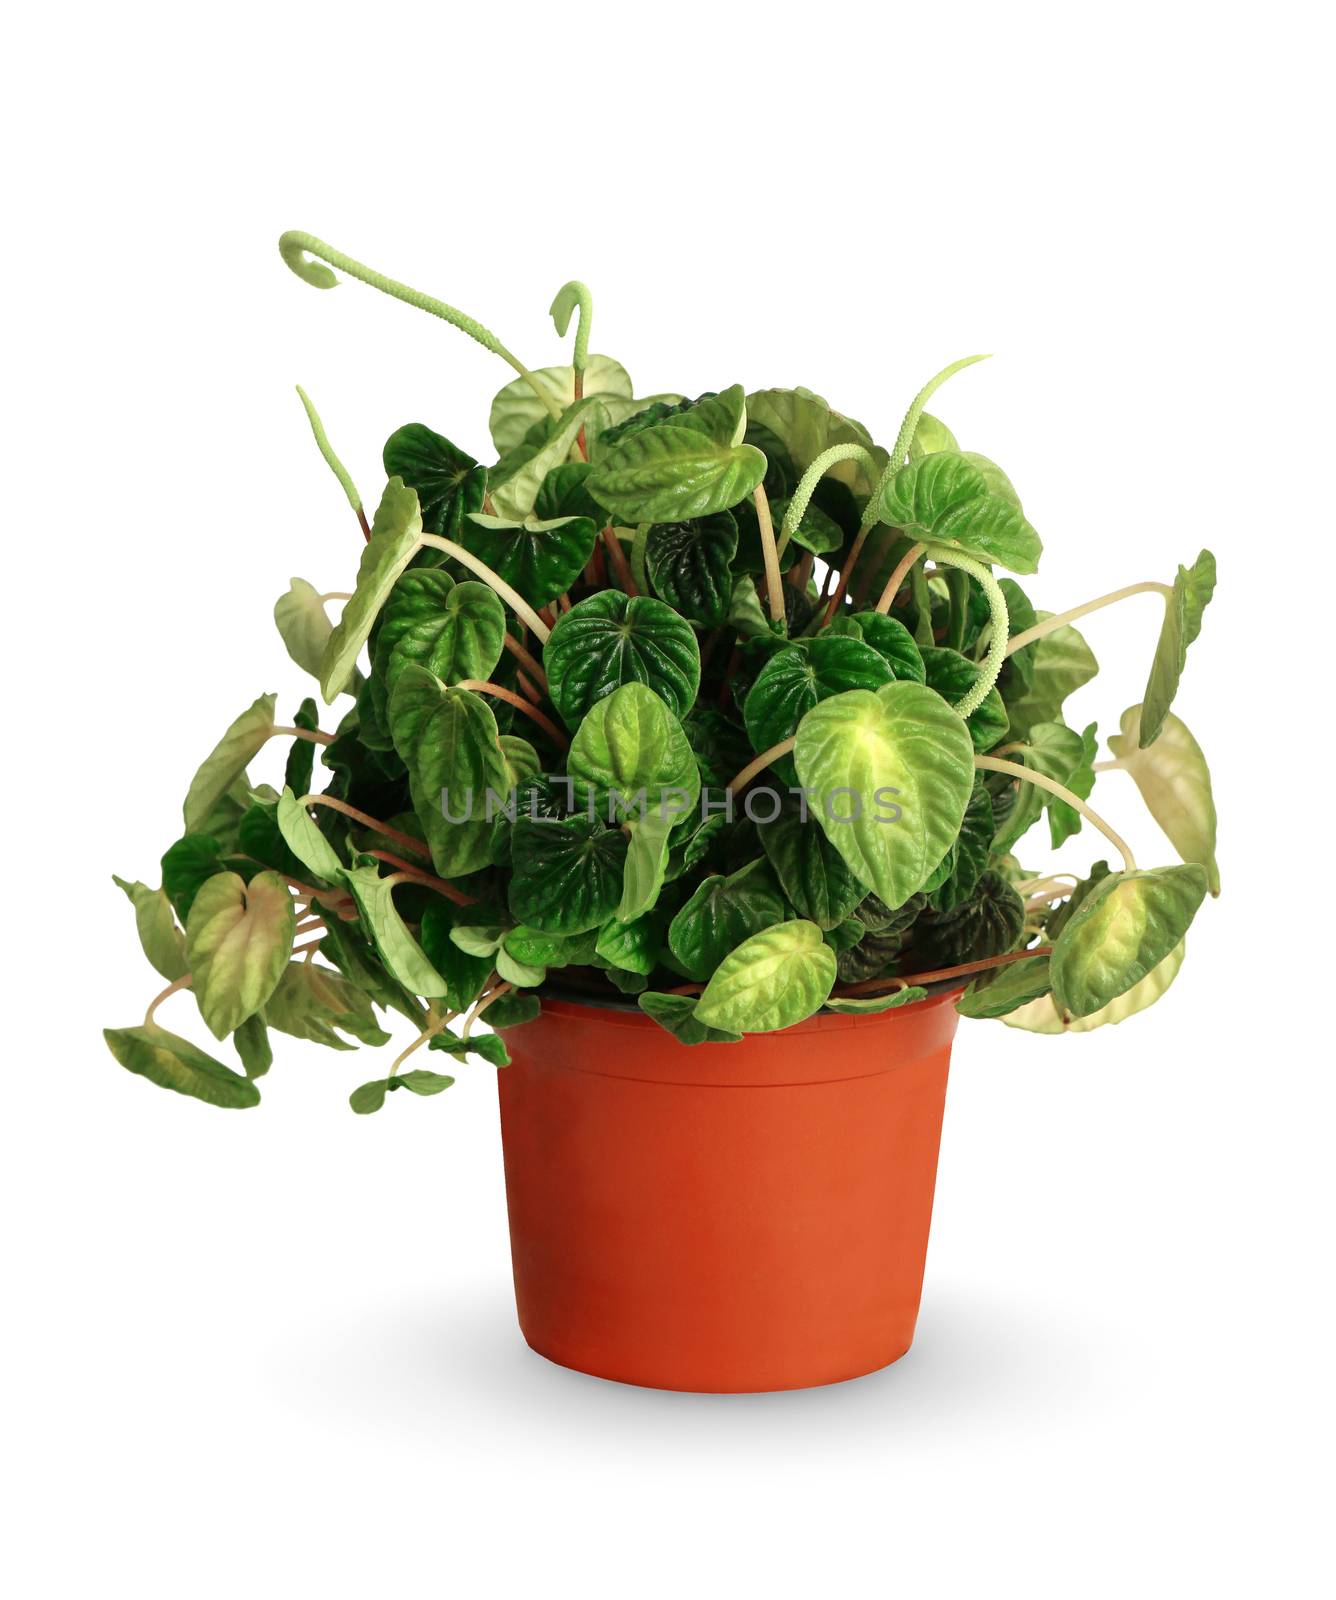 Houseplant - Peperomia caperata a potted plant isolated over whi by kav777